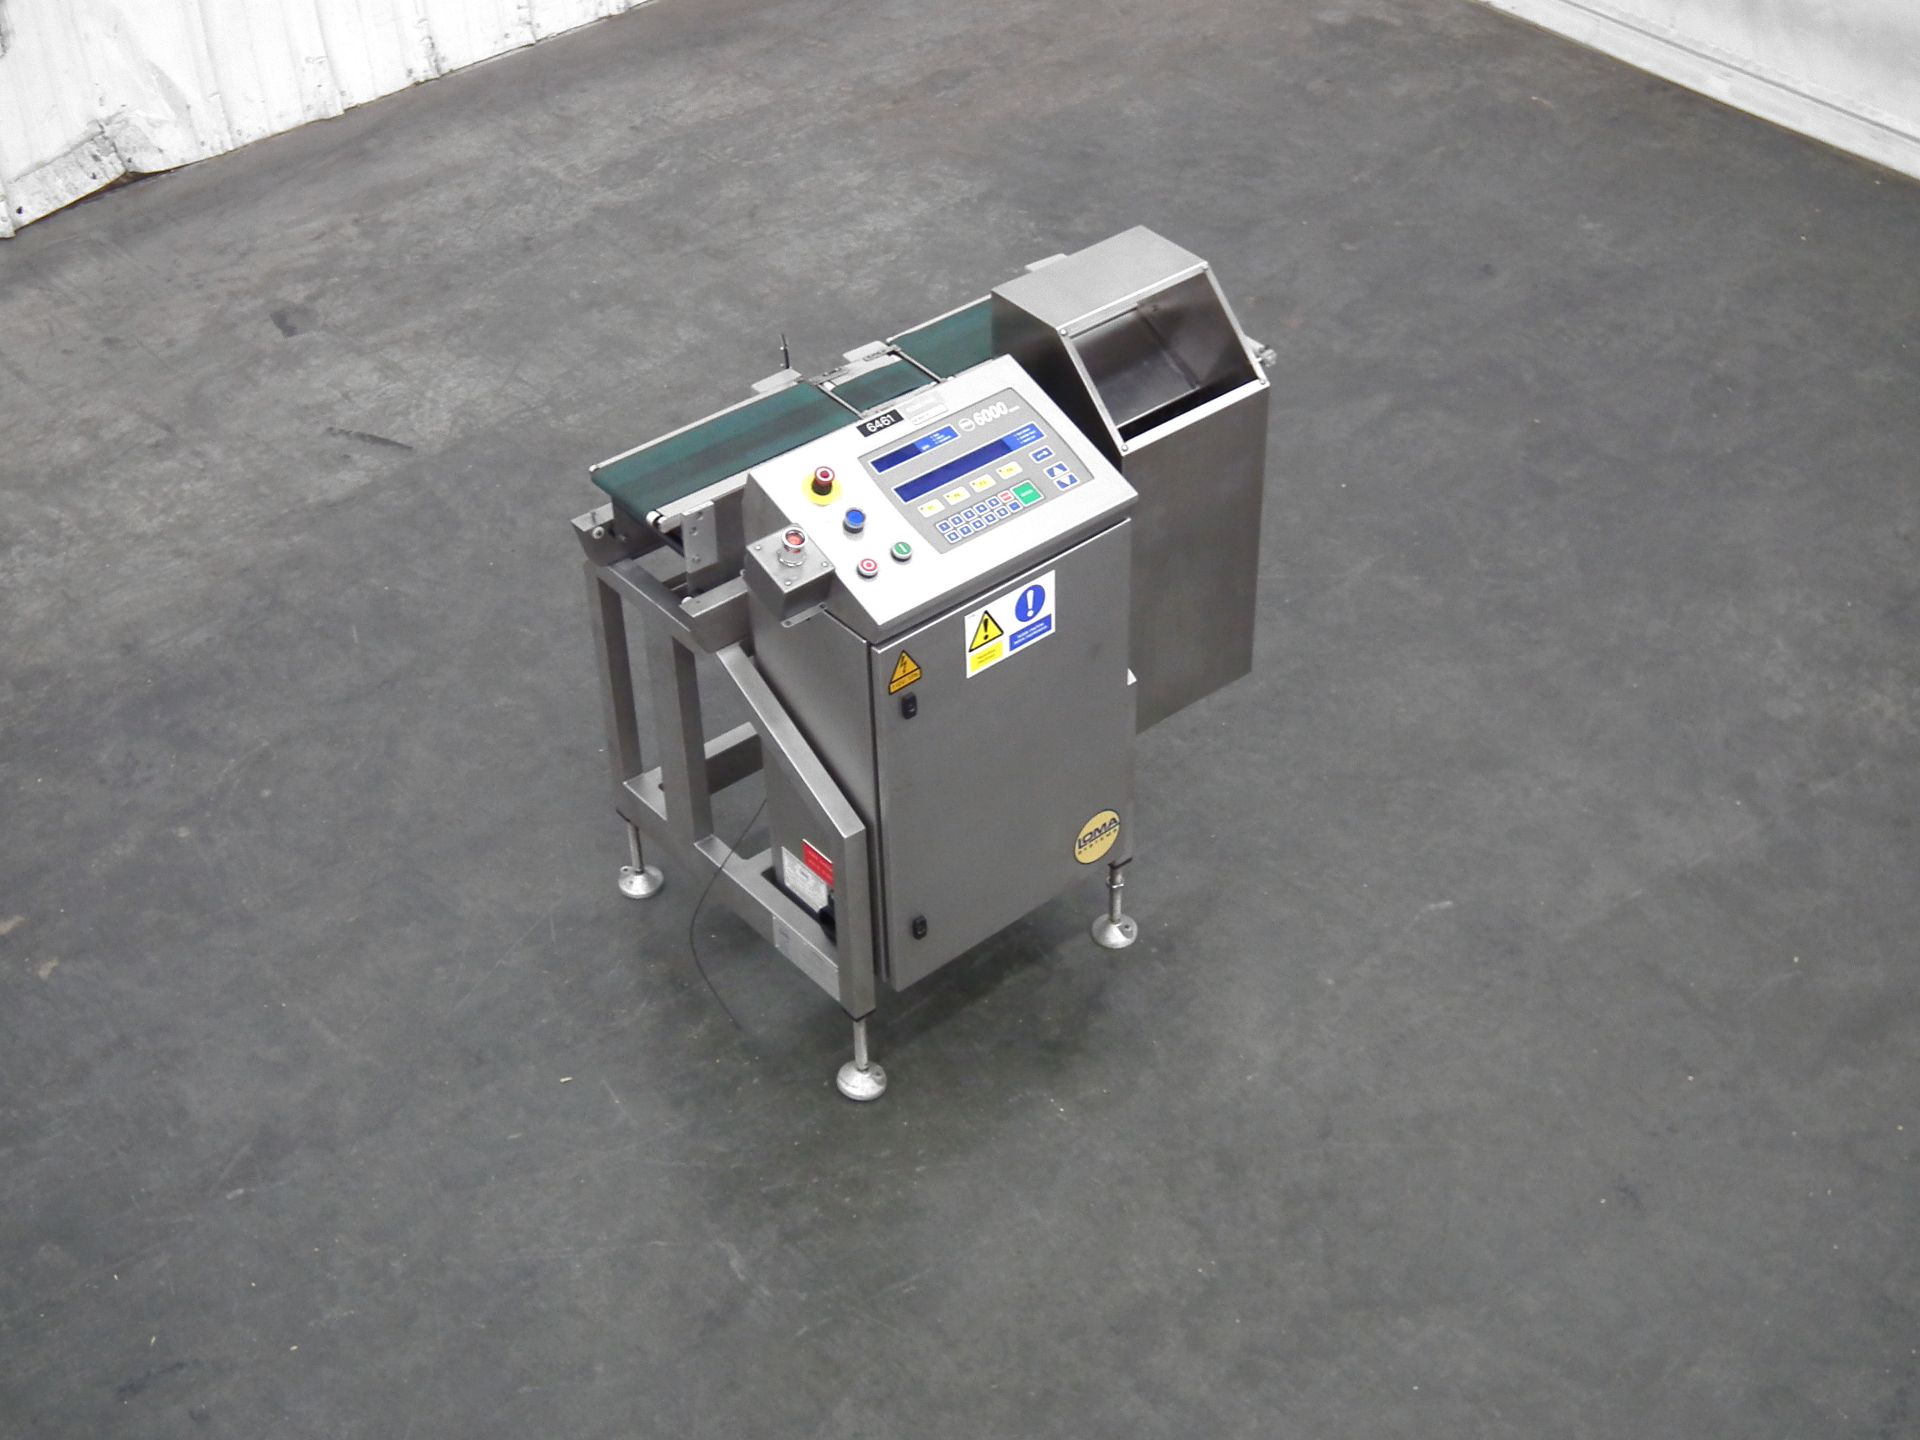 Loma 6000 Three Belt Checkweigher 5.5" Wide Belt B3157 - Image 5 of 9